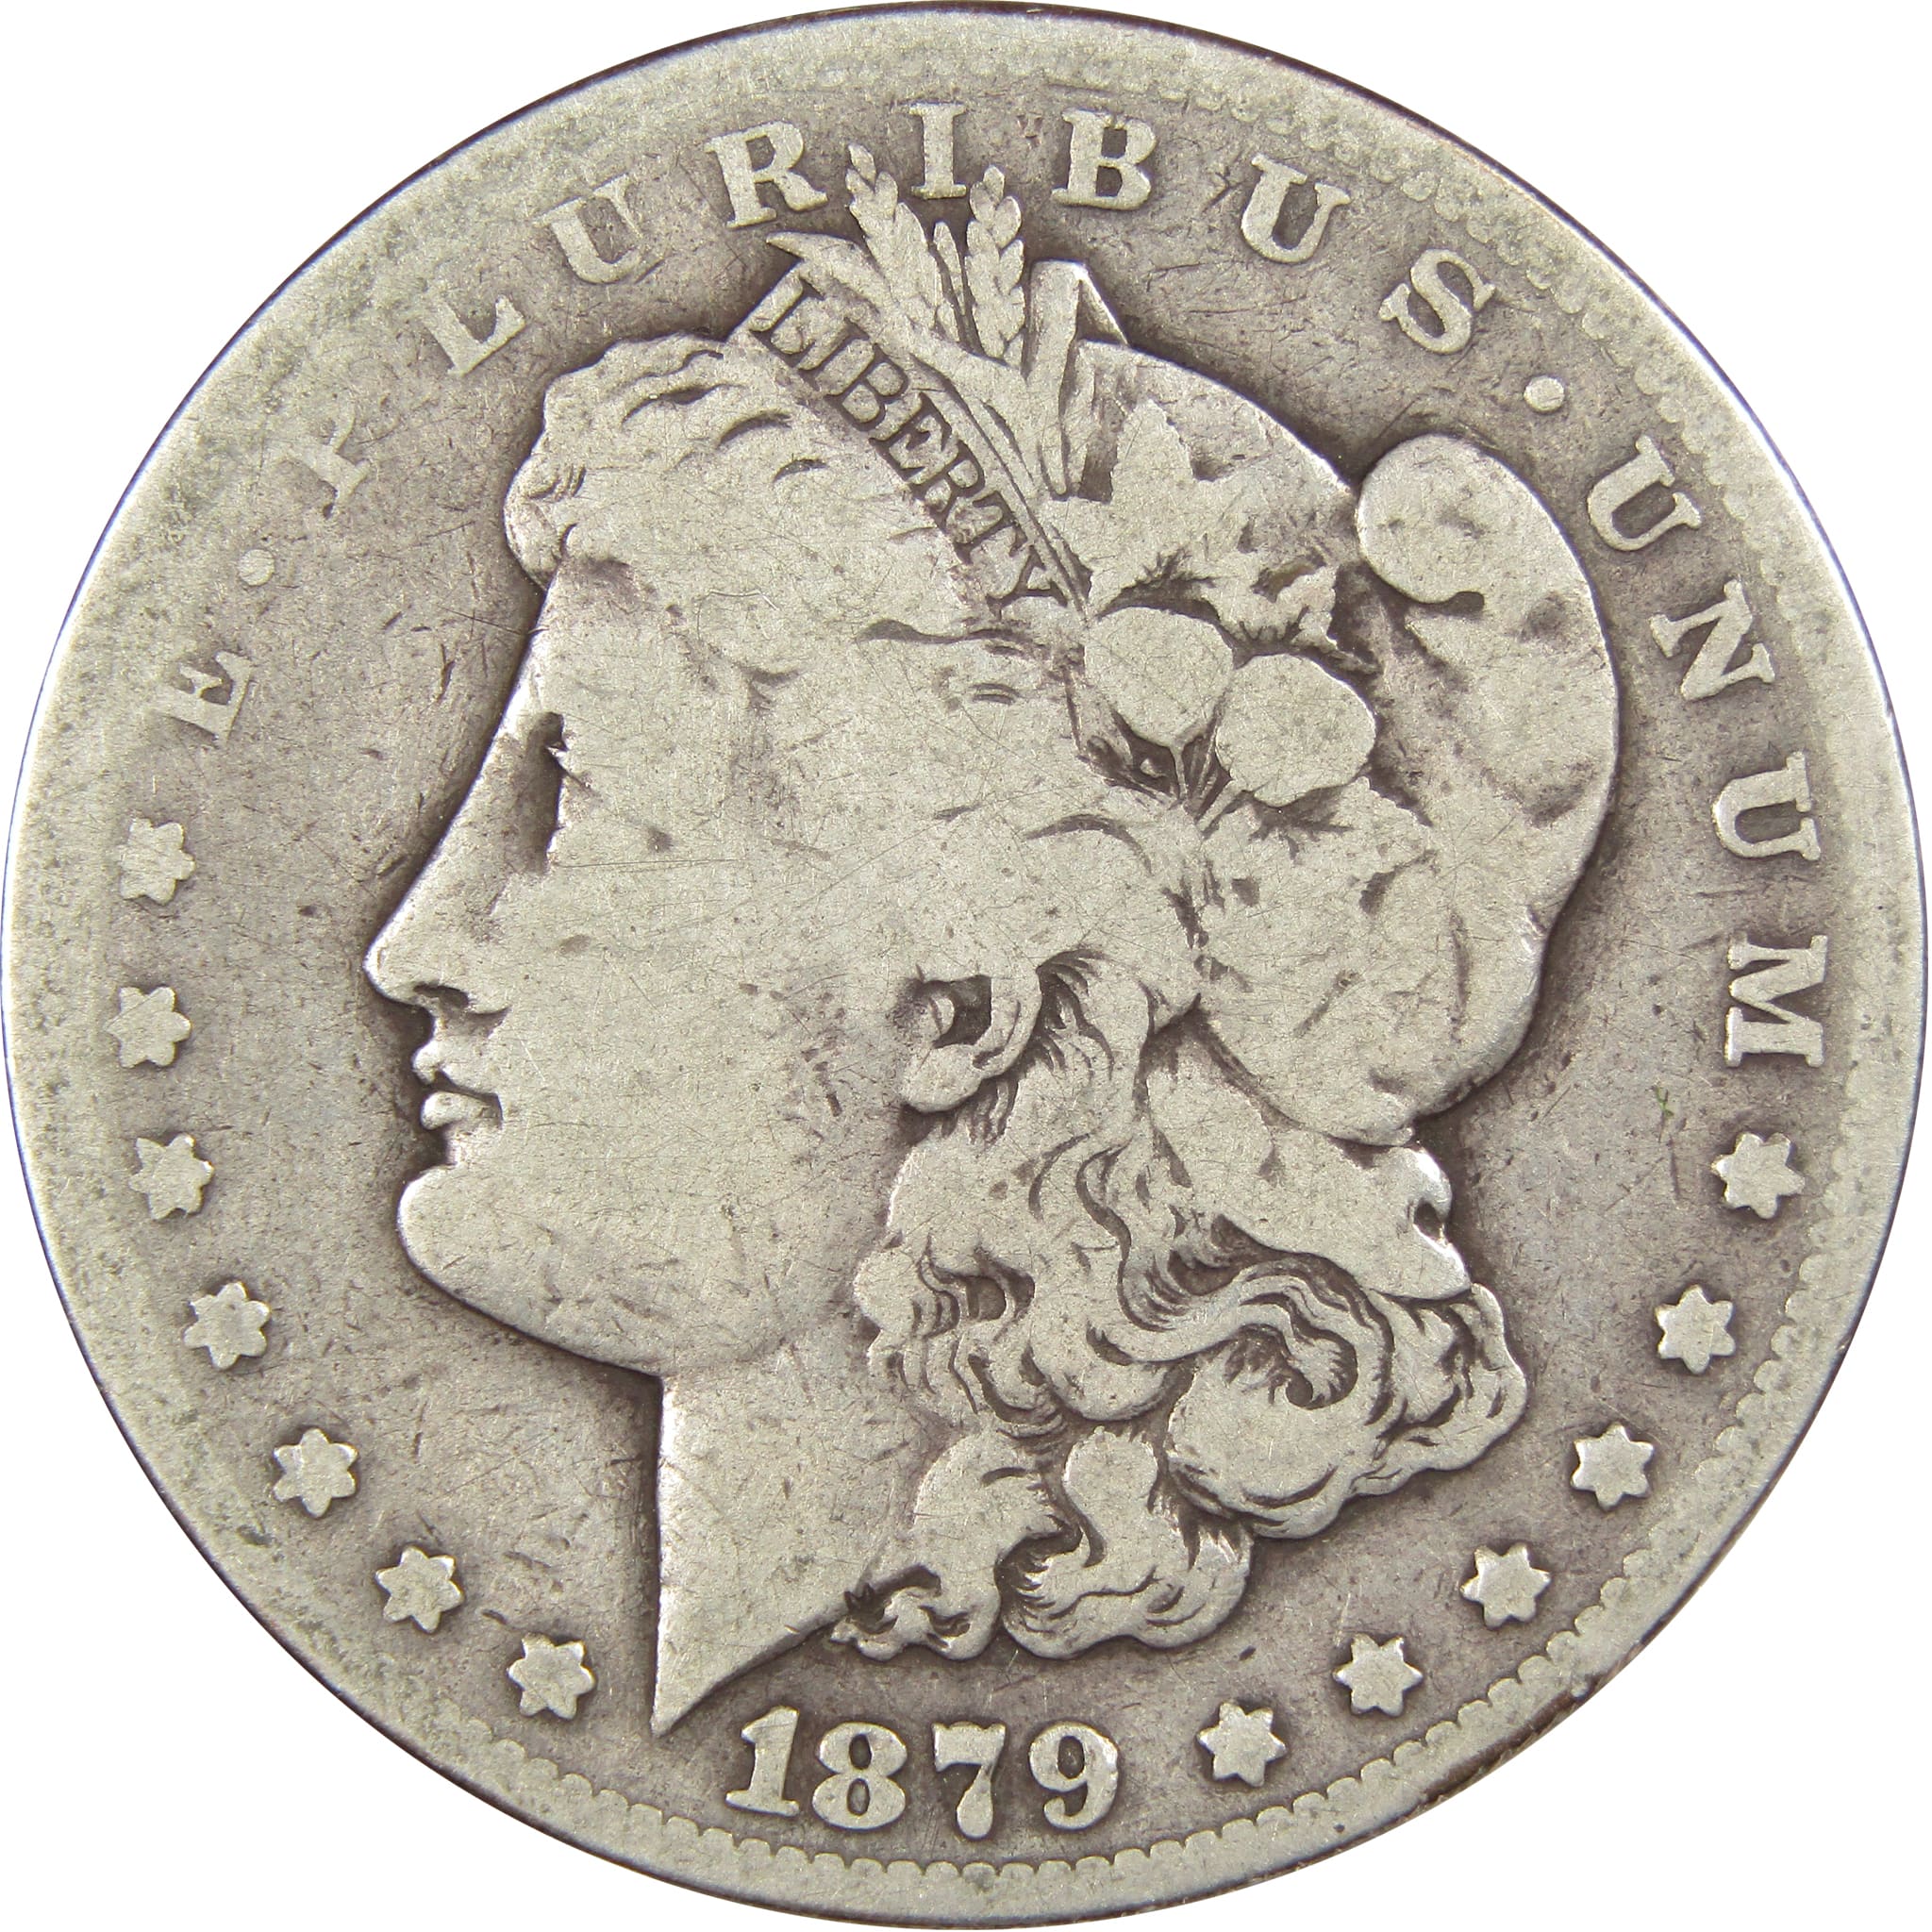 1879 S Rev 78 Morgan Dollar AG About Good 90% Silver SKU:IPC7448 - Morgan coin - Morgan silver dollar - Morgan silver dollar for sale - Profile Coins &amp; Collectibles